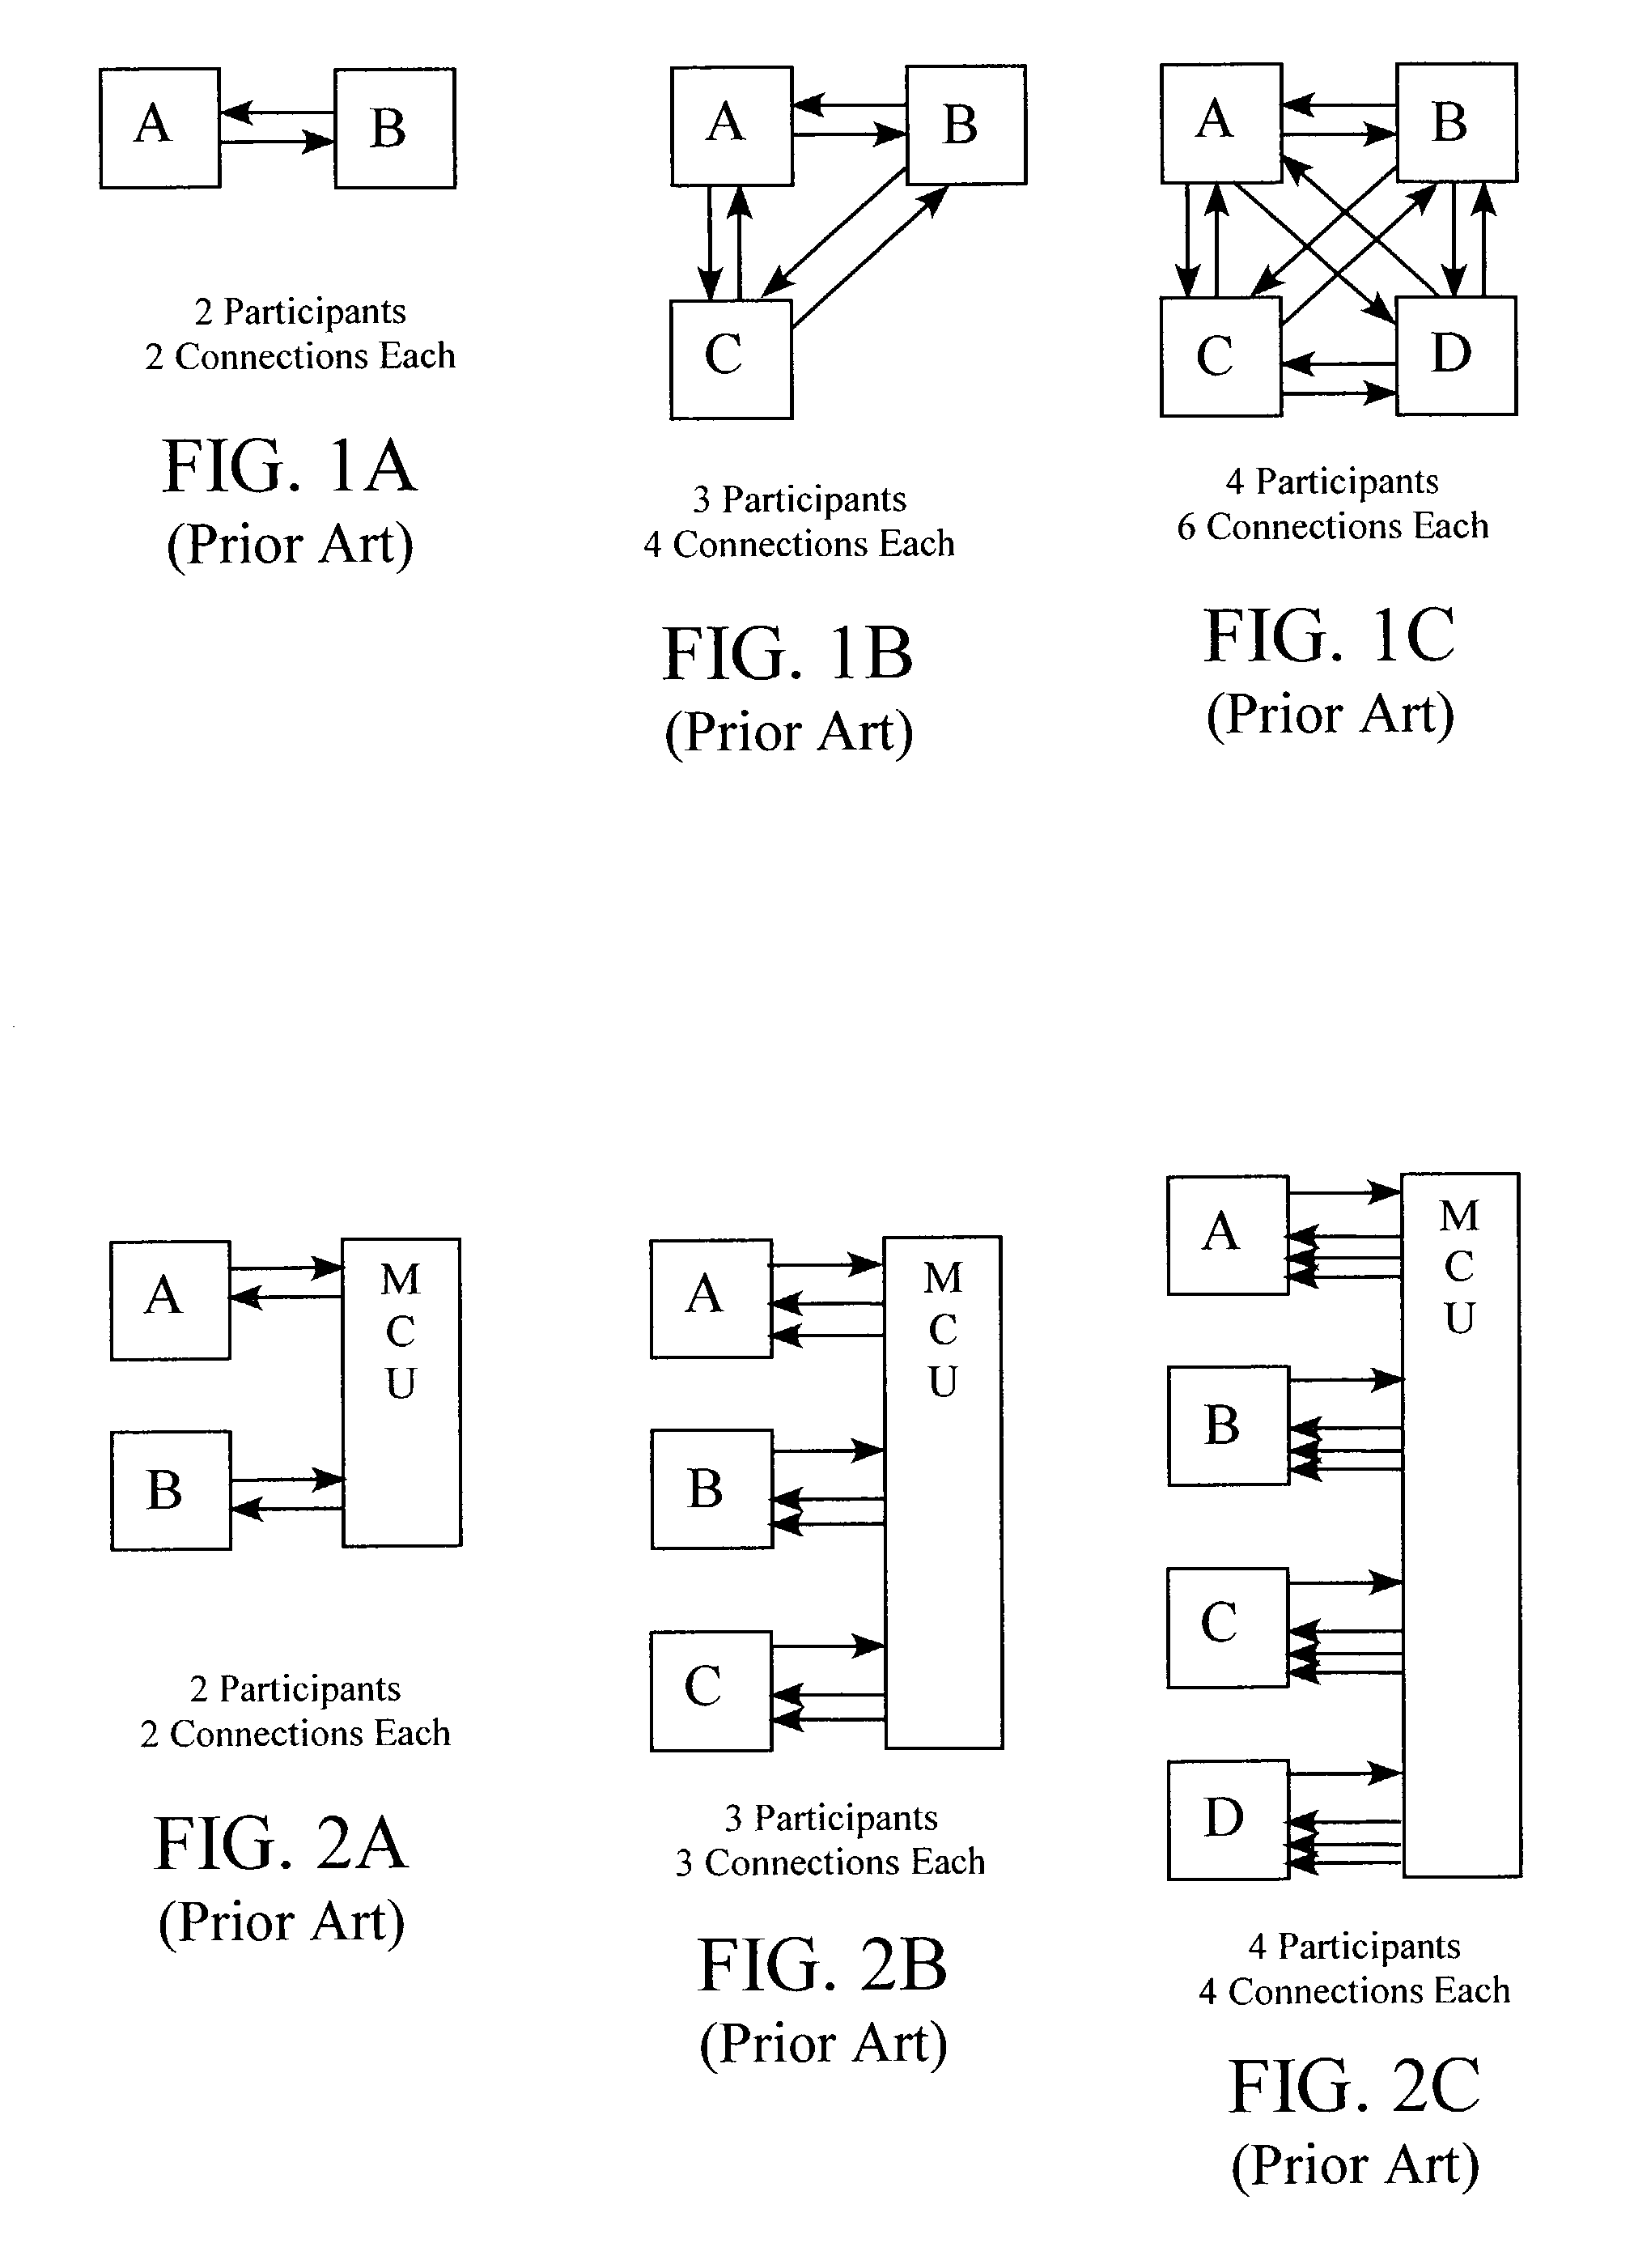 Multi-participant conference system with controllable content delivery using a client monitor back-channel